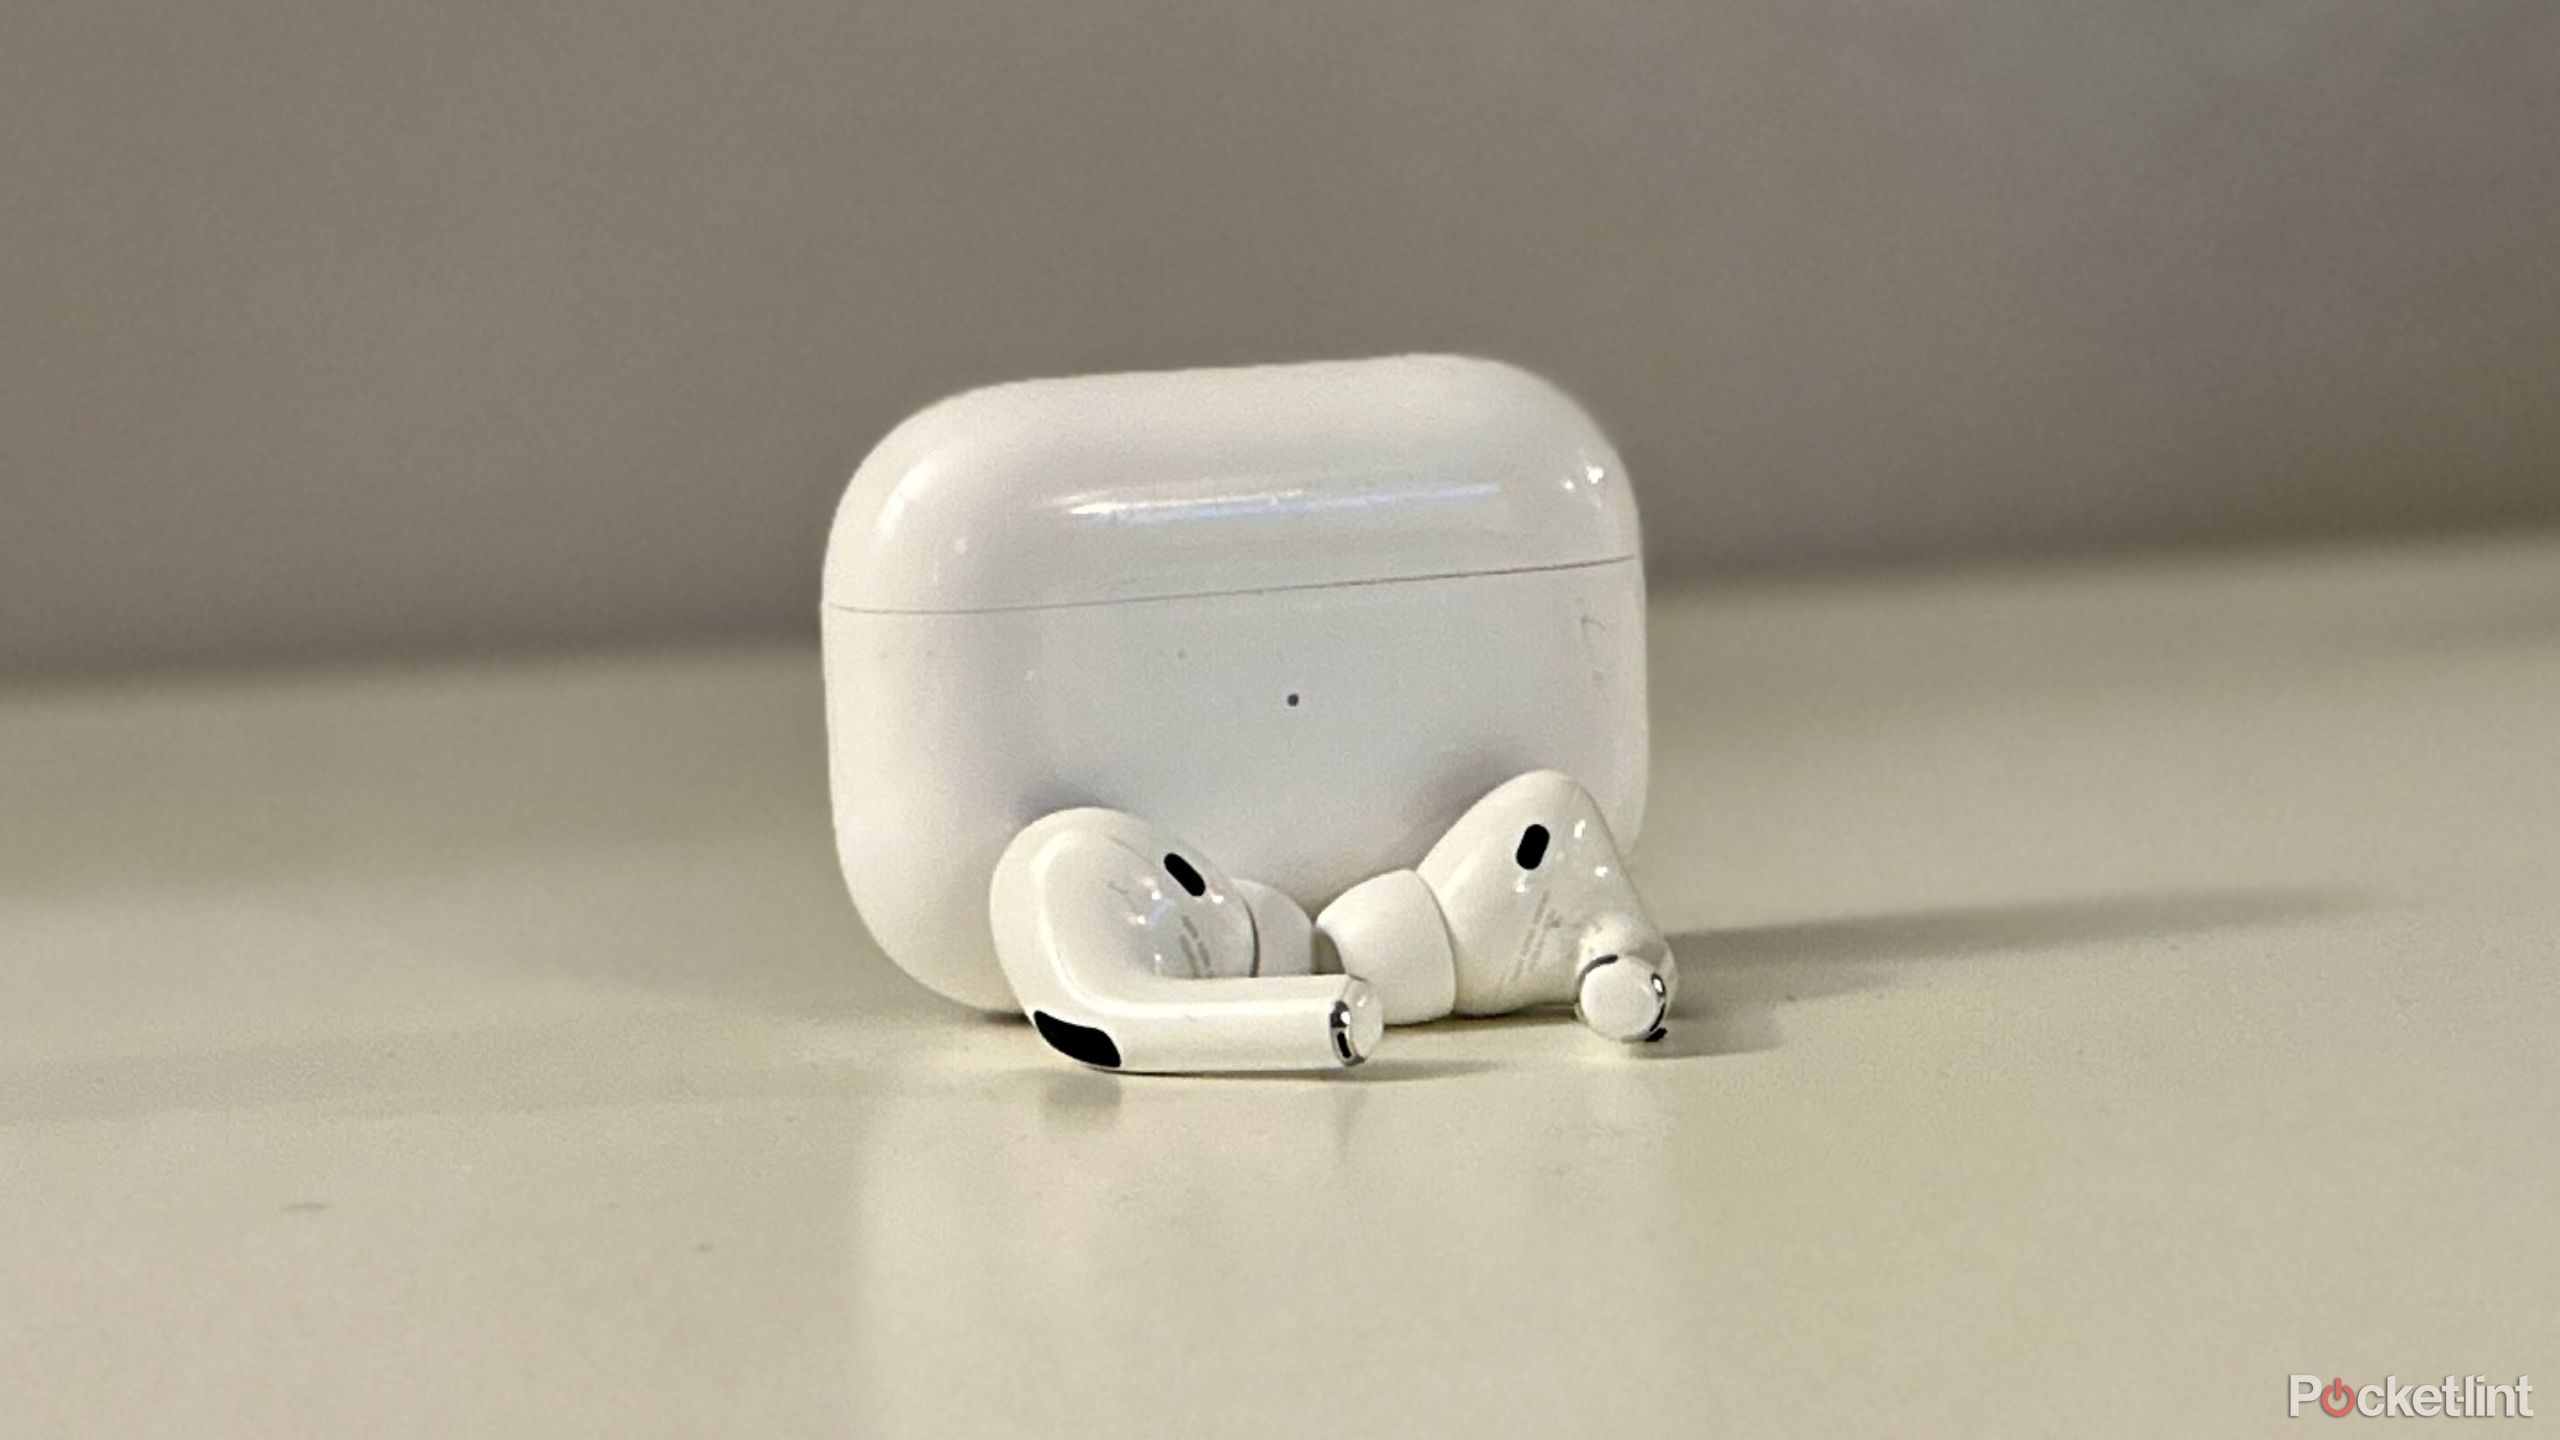 AirPods Pro and case placed on a table